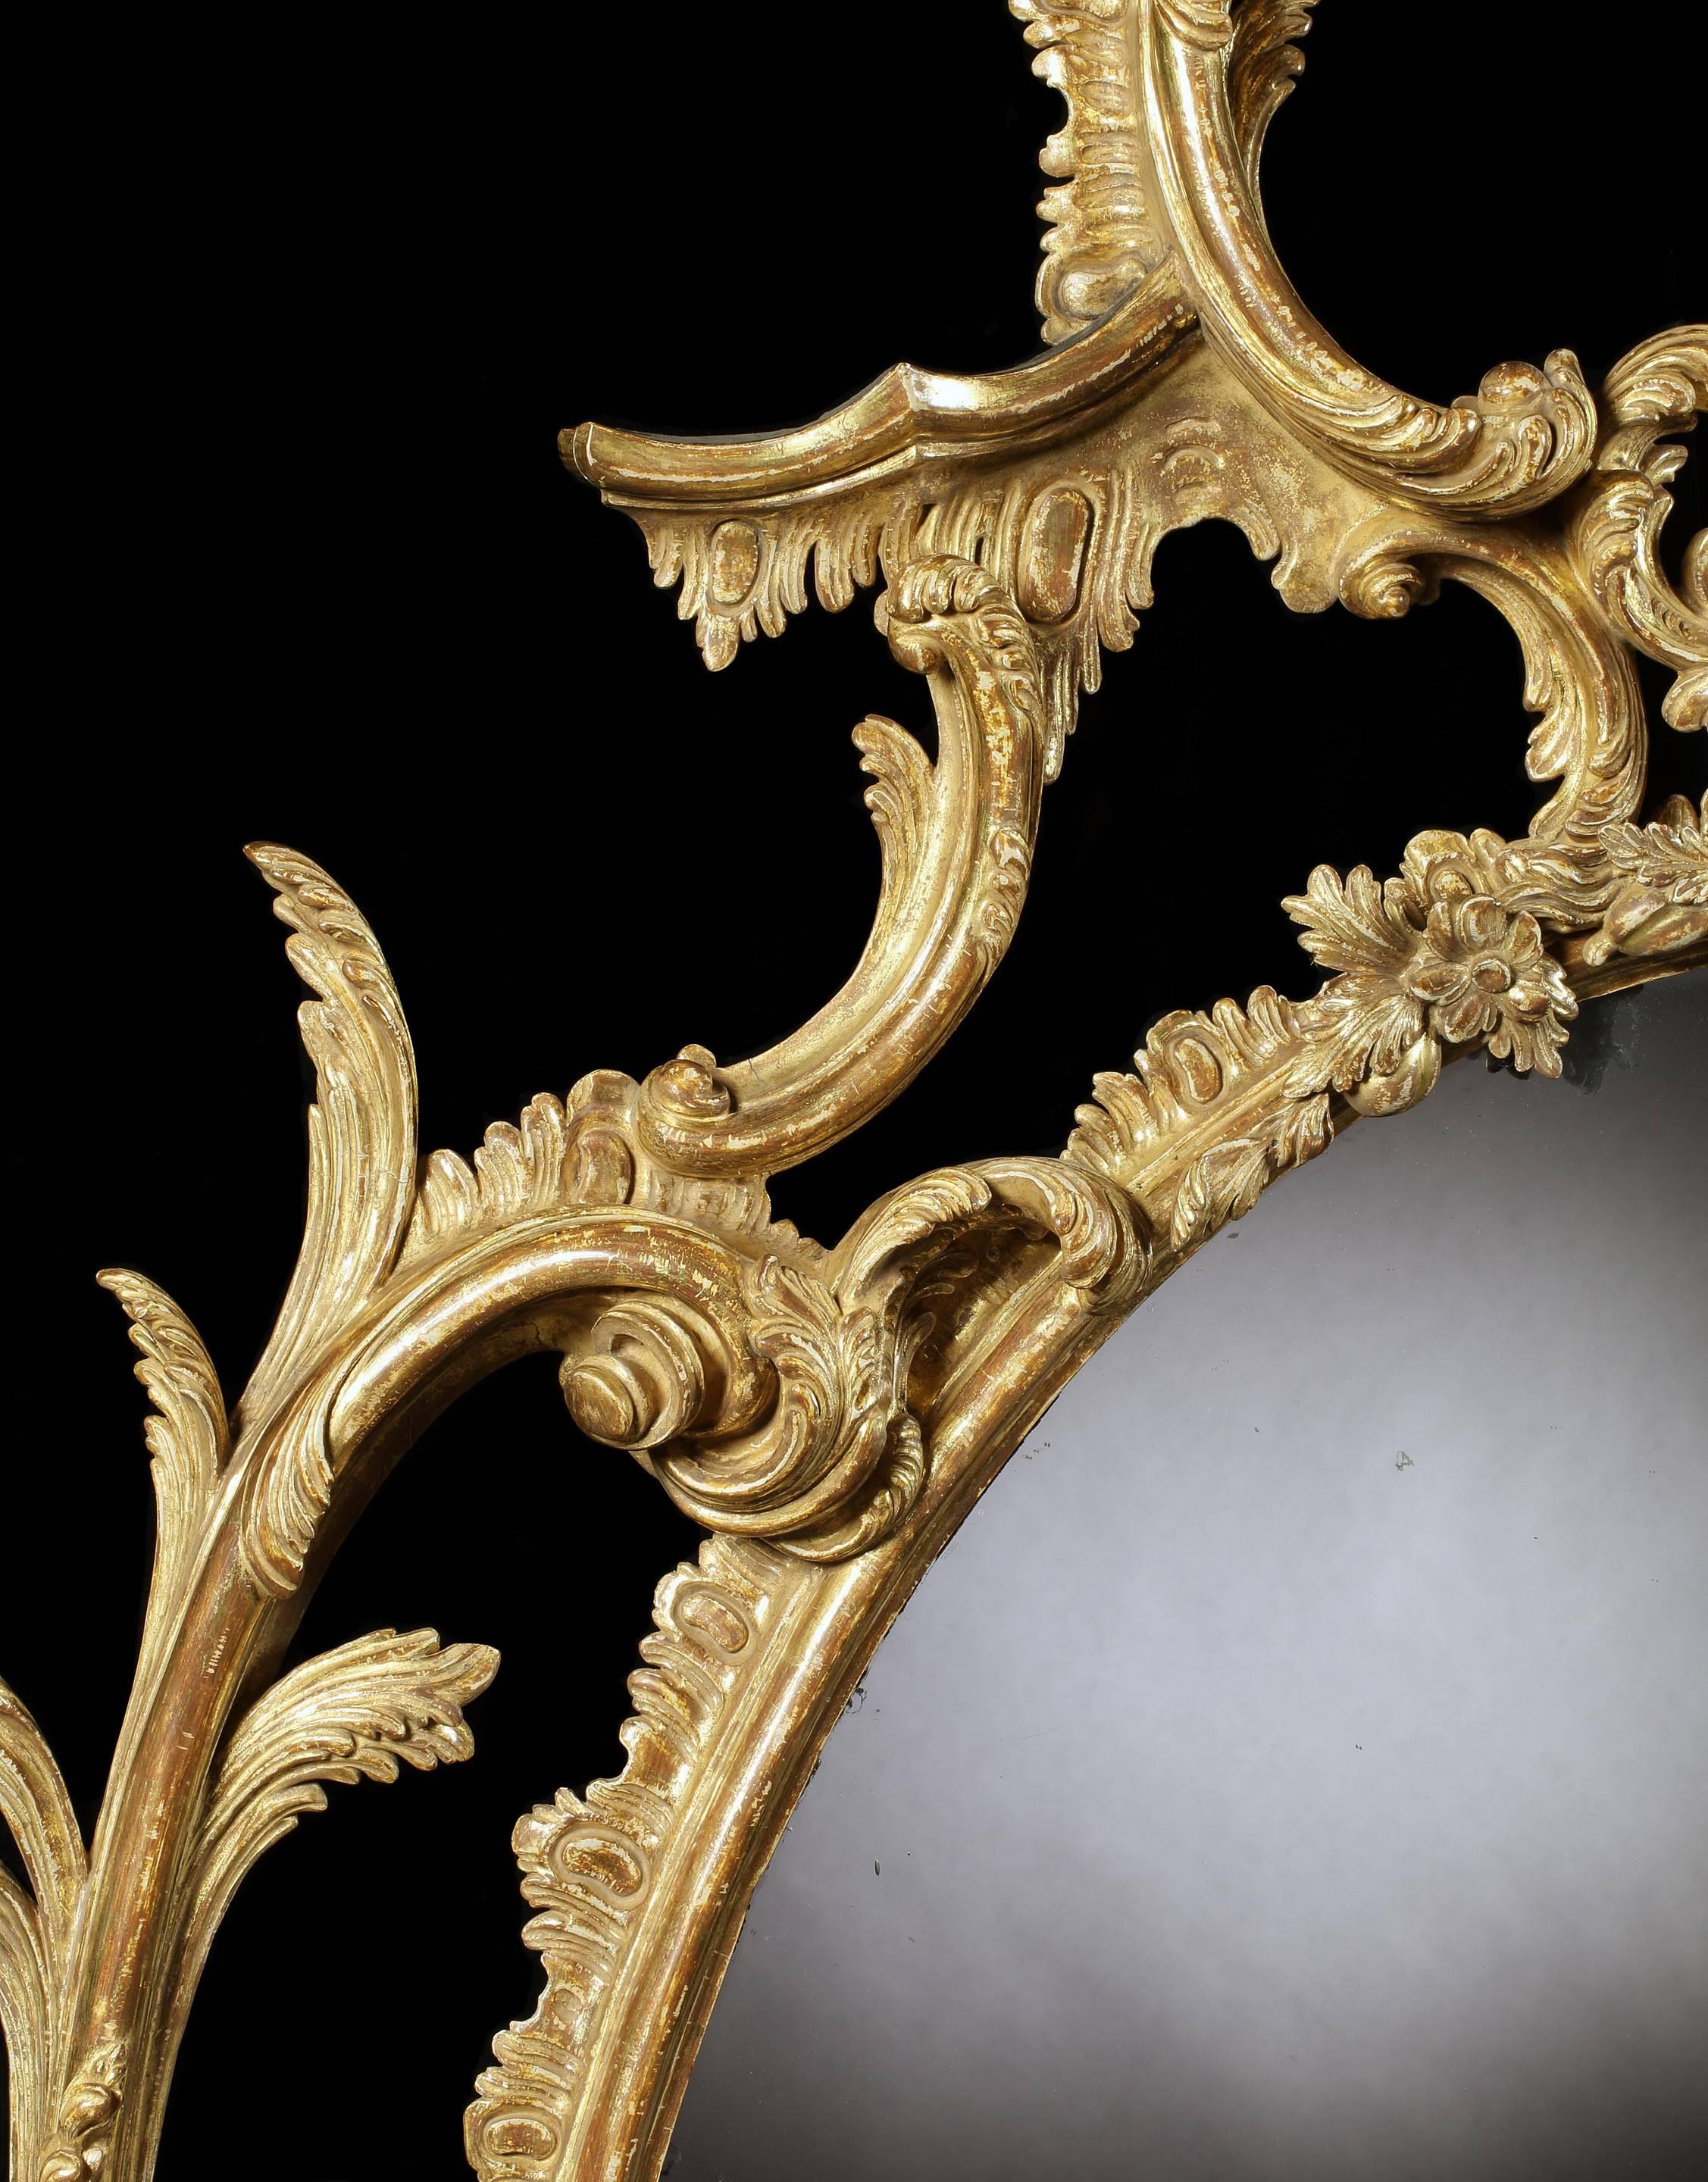 The mirror retains the original mirror plate, which was re-used from an earlier frame. The high cost of mirror plate in the 18th century meant that re-use was common practice at the time. 
The frame is re-gilded. 

The design for this finely